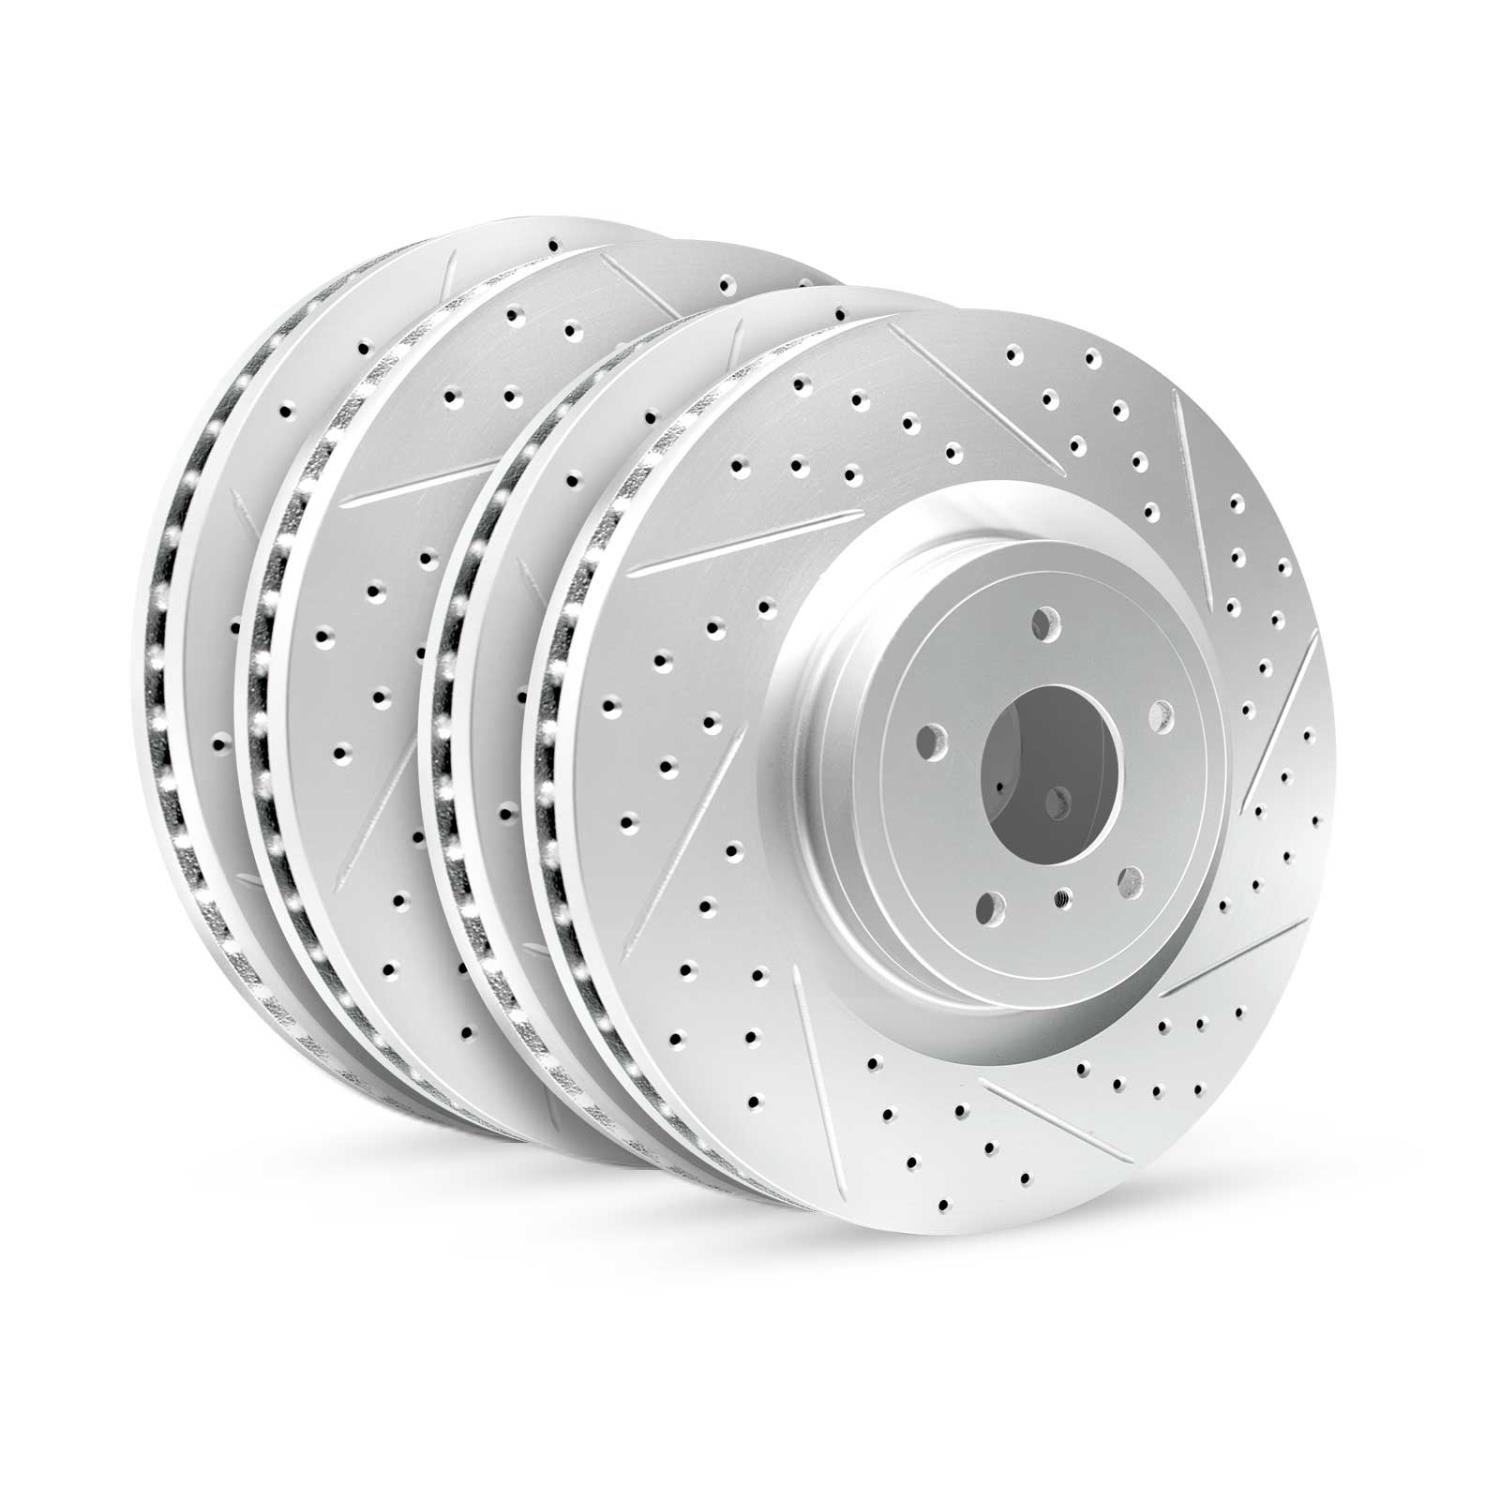 GEO-Carbon Drilled/Slotted Rotors, 2004-2010 BMW, Position: Front/Rear